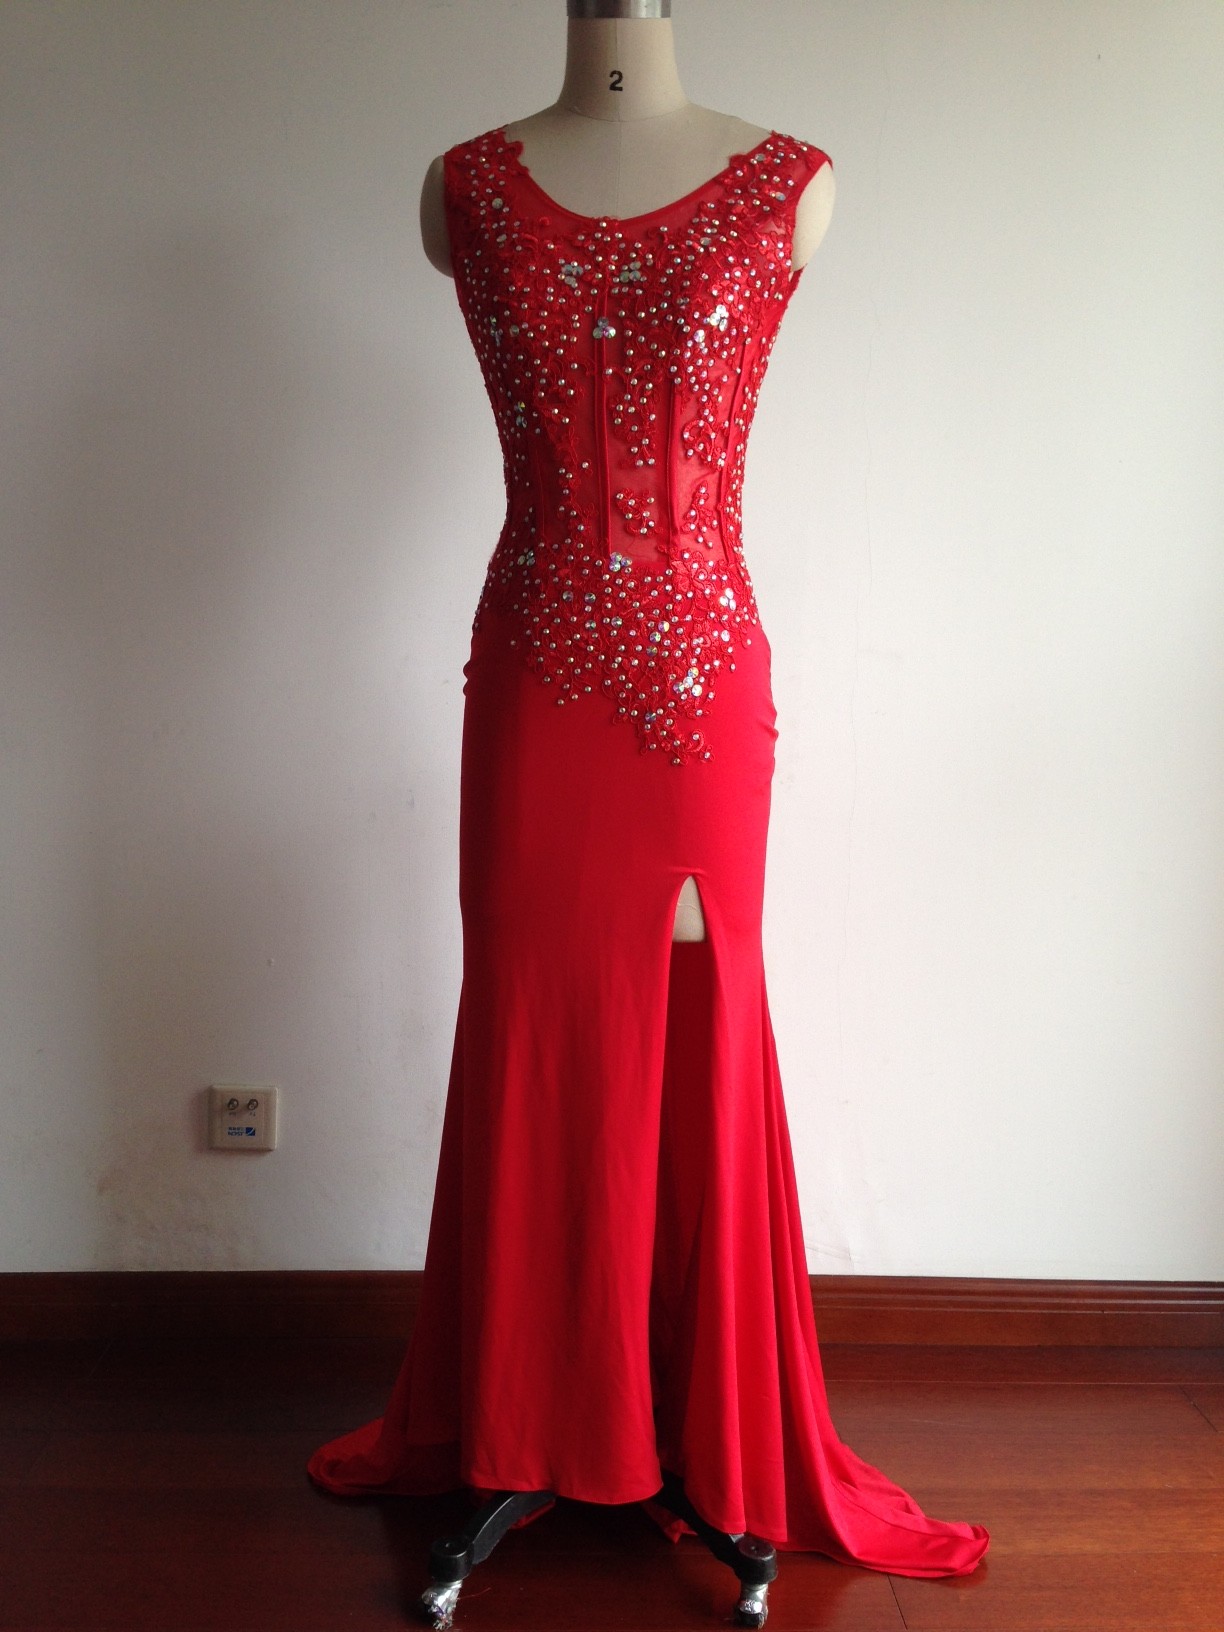 2016 Fashion Prom Dresses,Red Prom Dress,Slit Formal Gown,Red Prom Dresses,Beaded Evening Gowns,Sexy Formal Gown For Teens